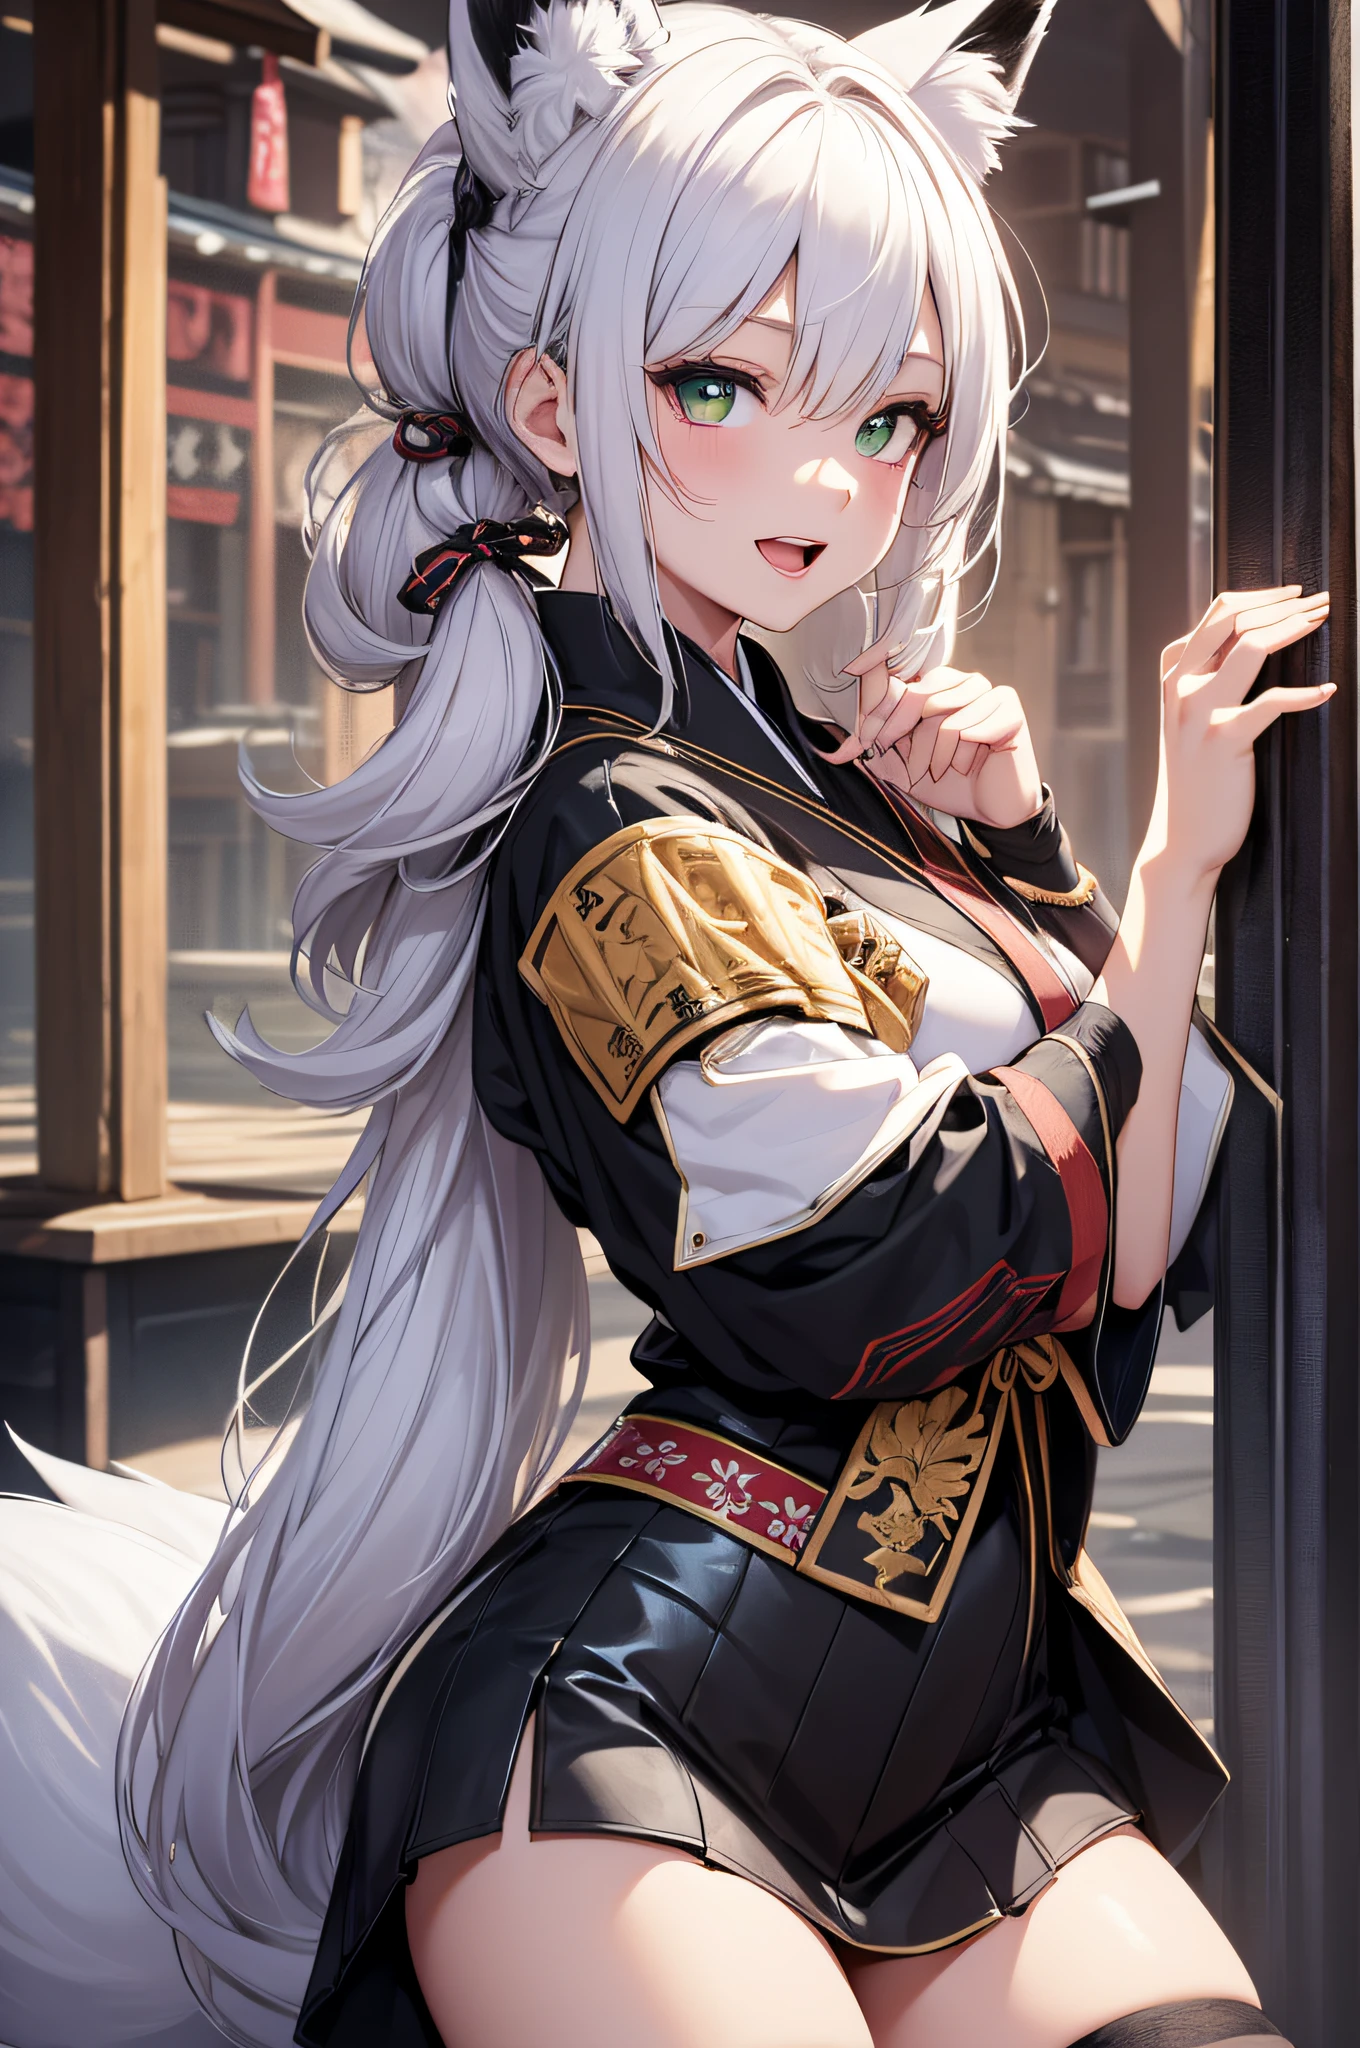 (extremely details CG、8K Wallpapers)、(extremely delicate and beautiful)、(​masterpiece)、(top-quality:1.0)、(超A high resolution:1.0)、beautiful  lighting、perfect lightning bolt、realistic shadow、[hight resolution]、Detailed skin、ultra-detailliert、detailed faces and eyes、Realistic eyes、Sharp pupils、sideshot、Full body, (jpn、Shrine 1.4)、Red torii gate、beauitful face、blurry backround、10 year old beautiful girl、shinny skin, (１The fox tail of the book grows:1.4)、Beautiful silver hair、short-hair、(poneyTail:1.2)、green colored eyes、Fox ears、hair adornments、Smile with open mouth、Curve、(Priestess Costume 1.2)、a miniskirt、wearing kneesocks、